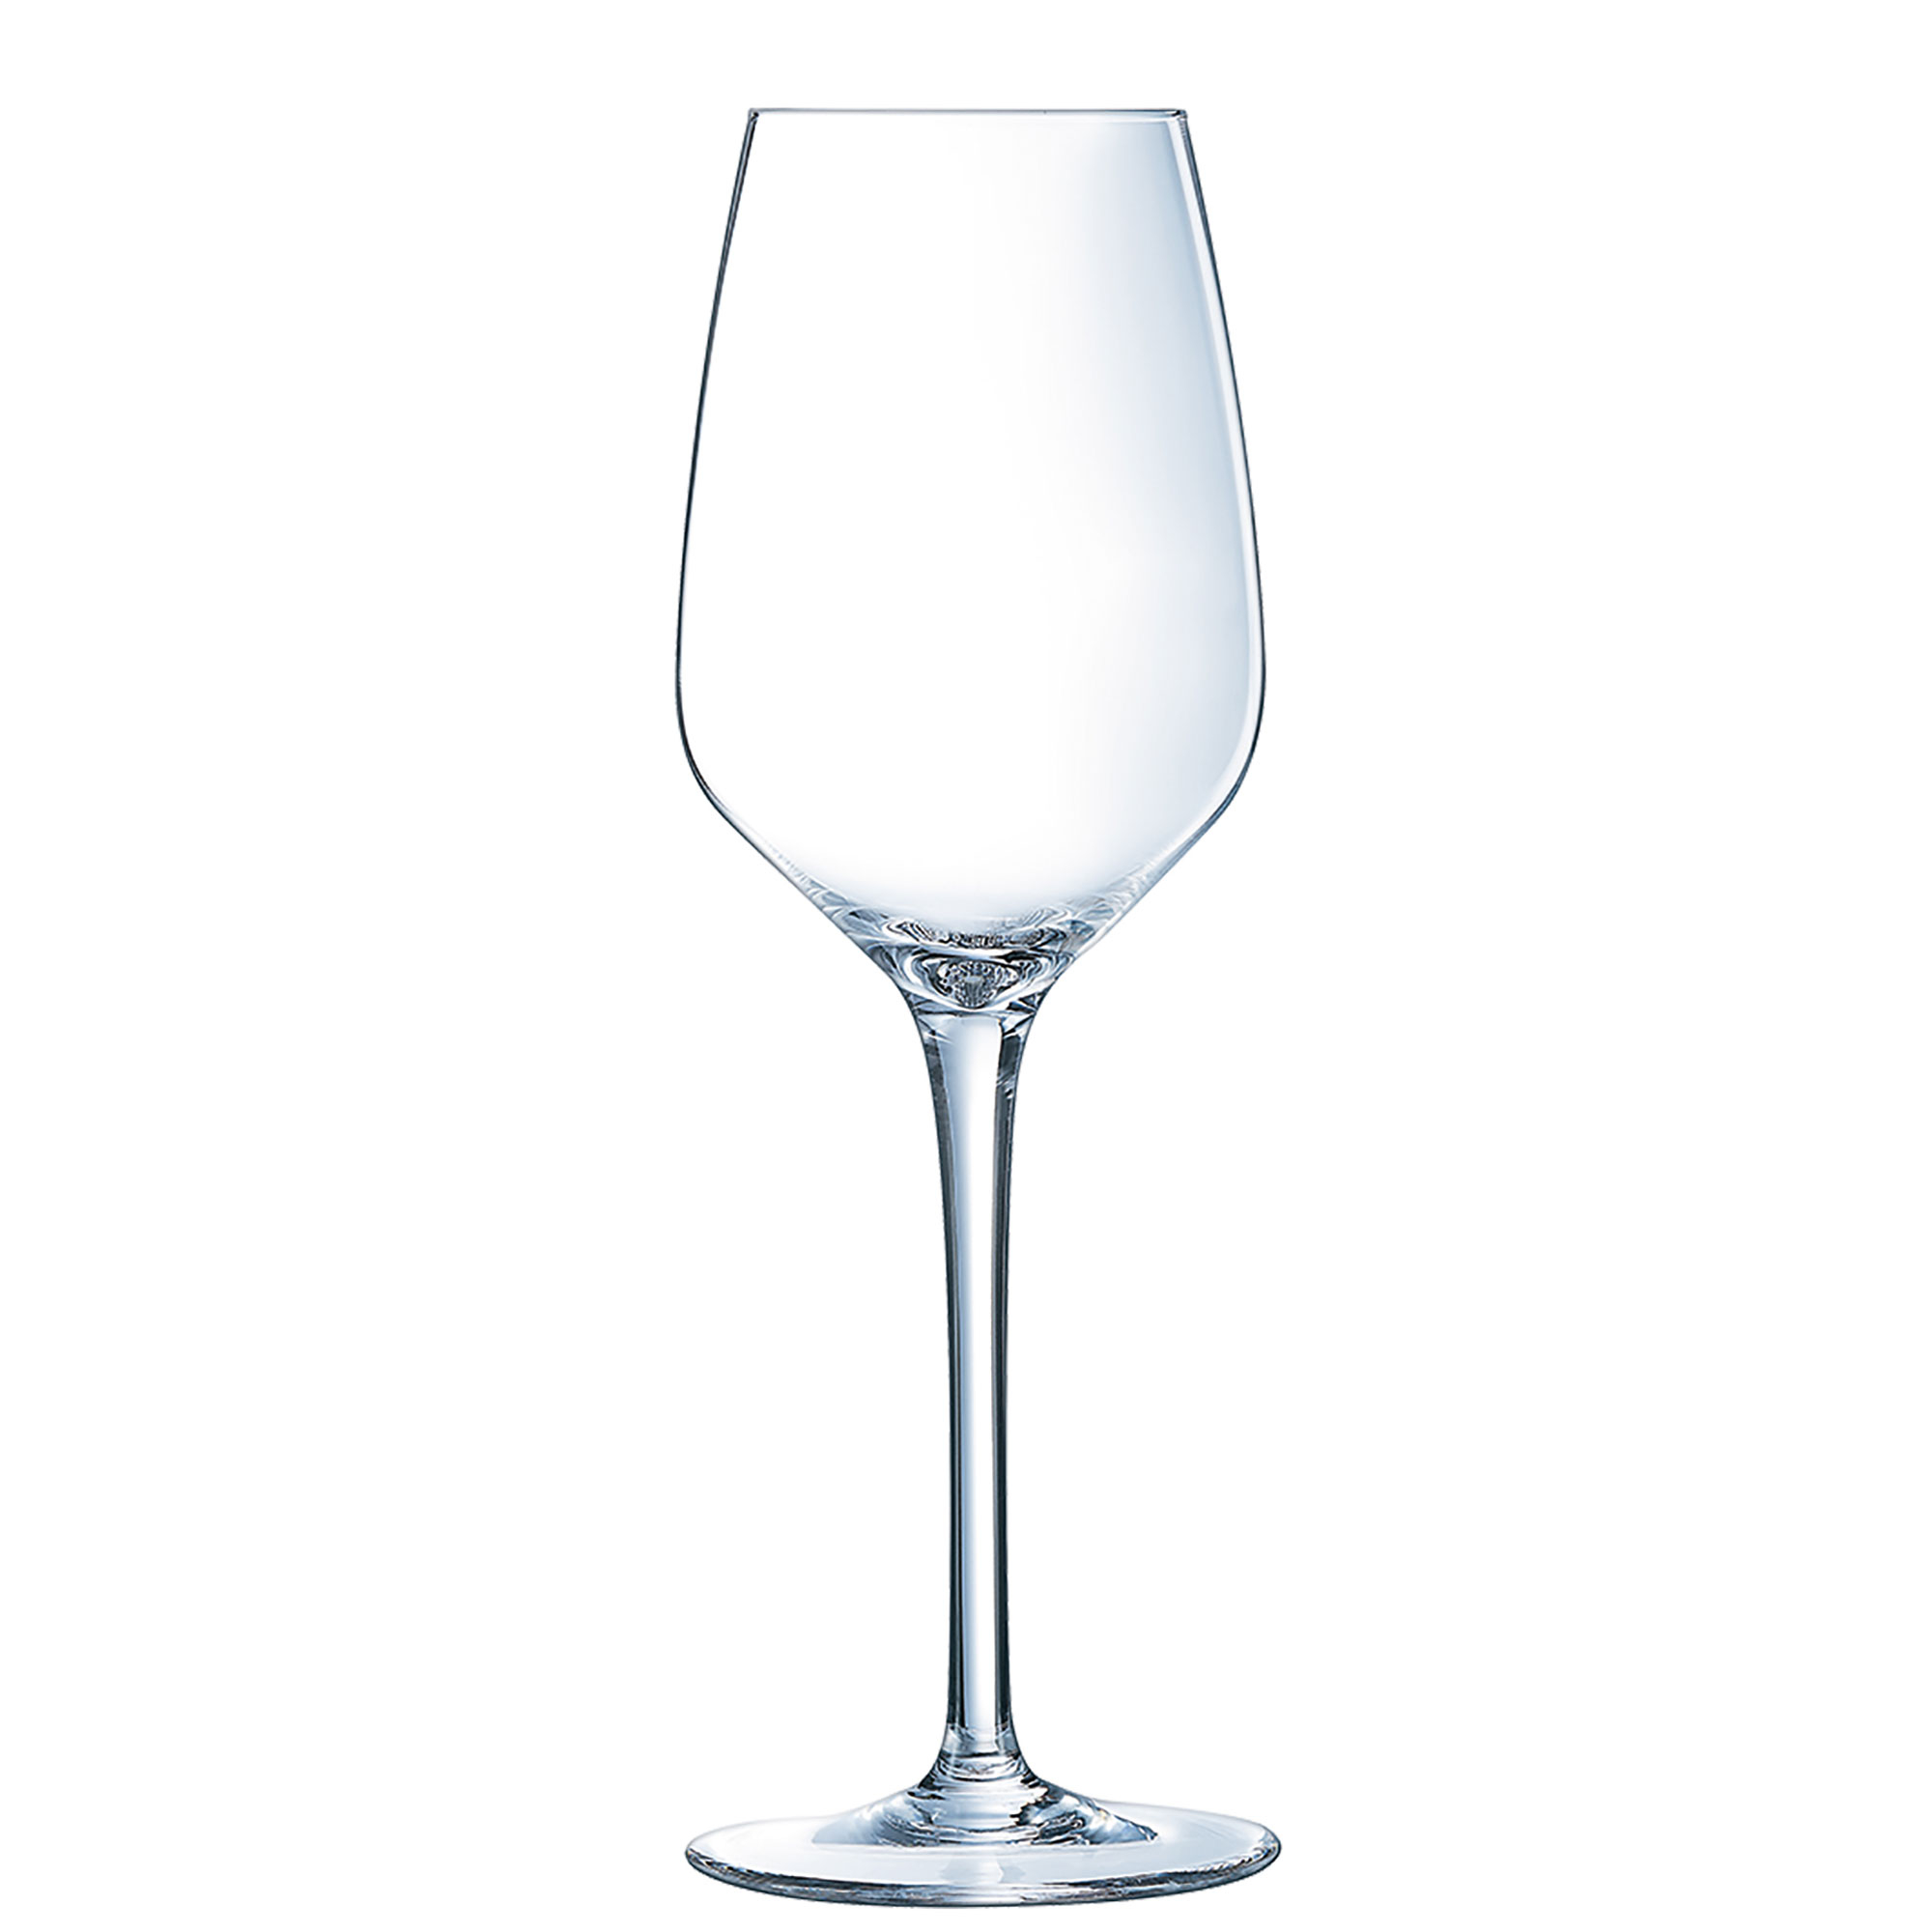 Port wine glass Sequence, C&S - 210ml